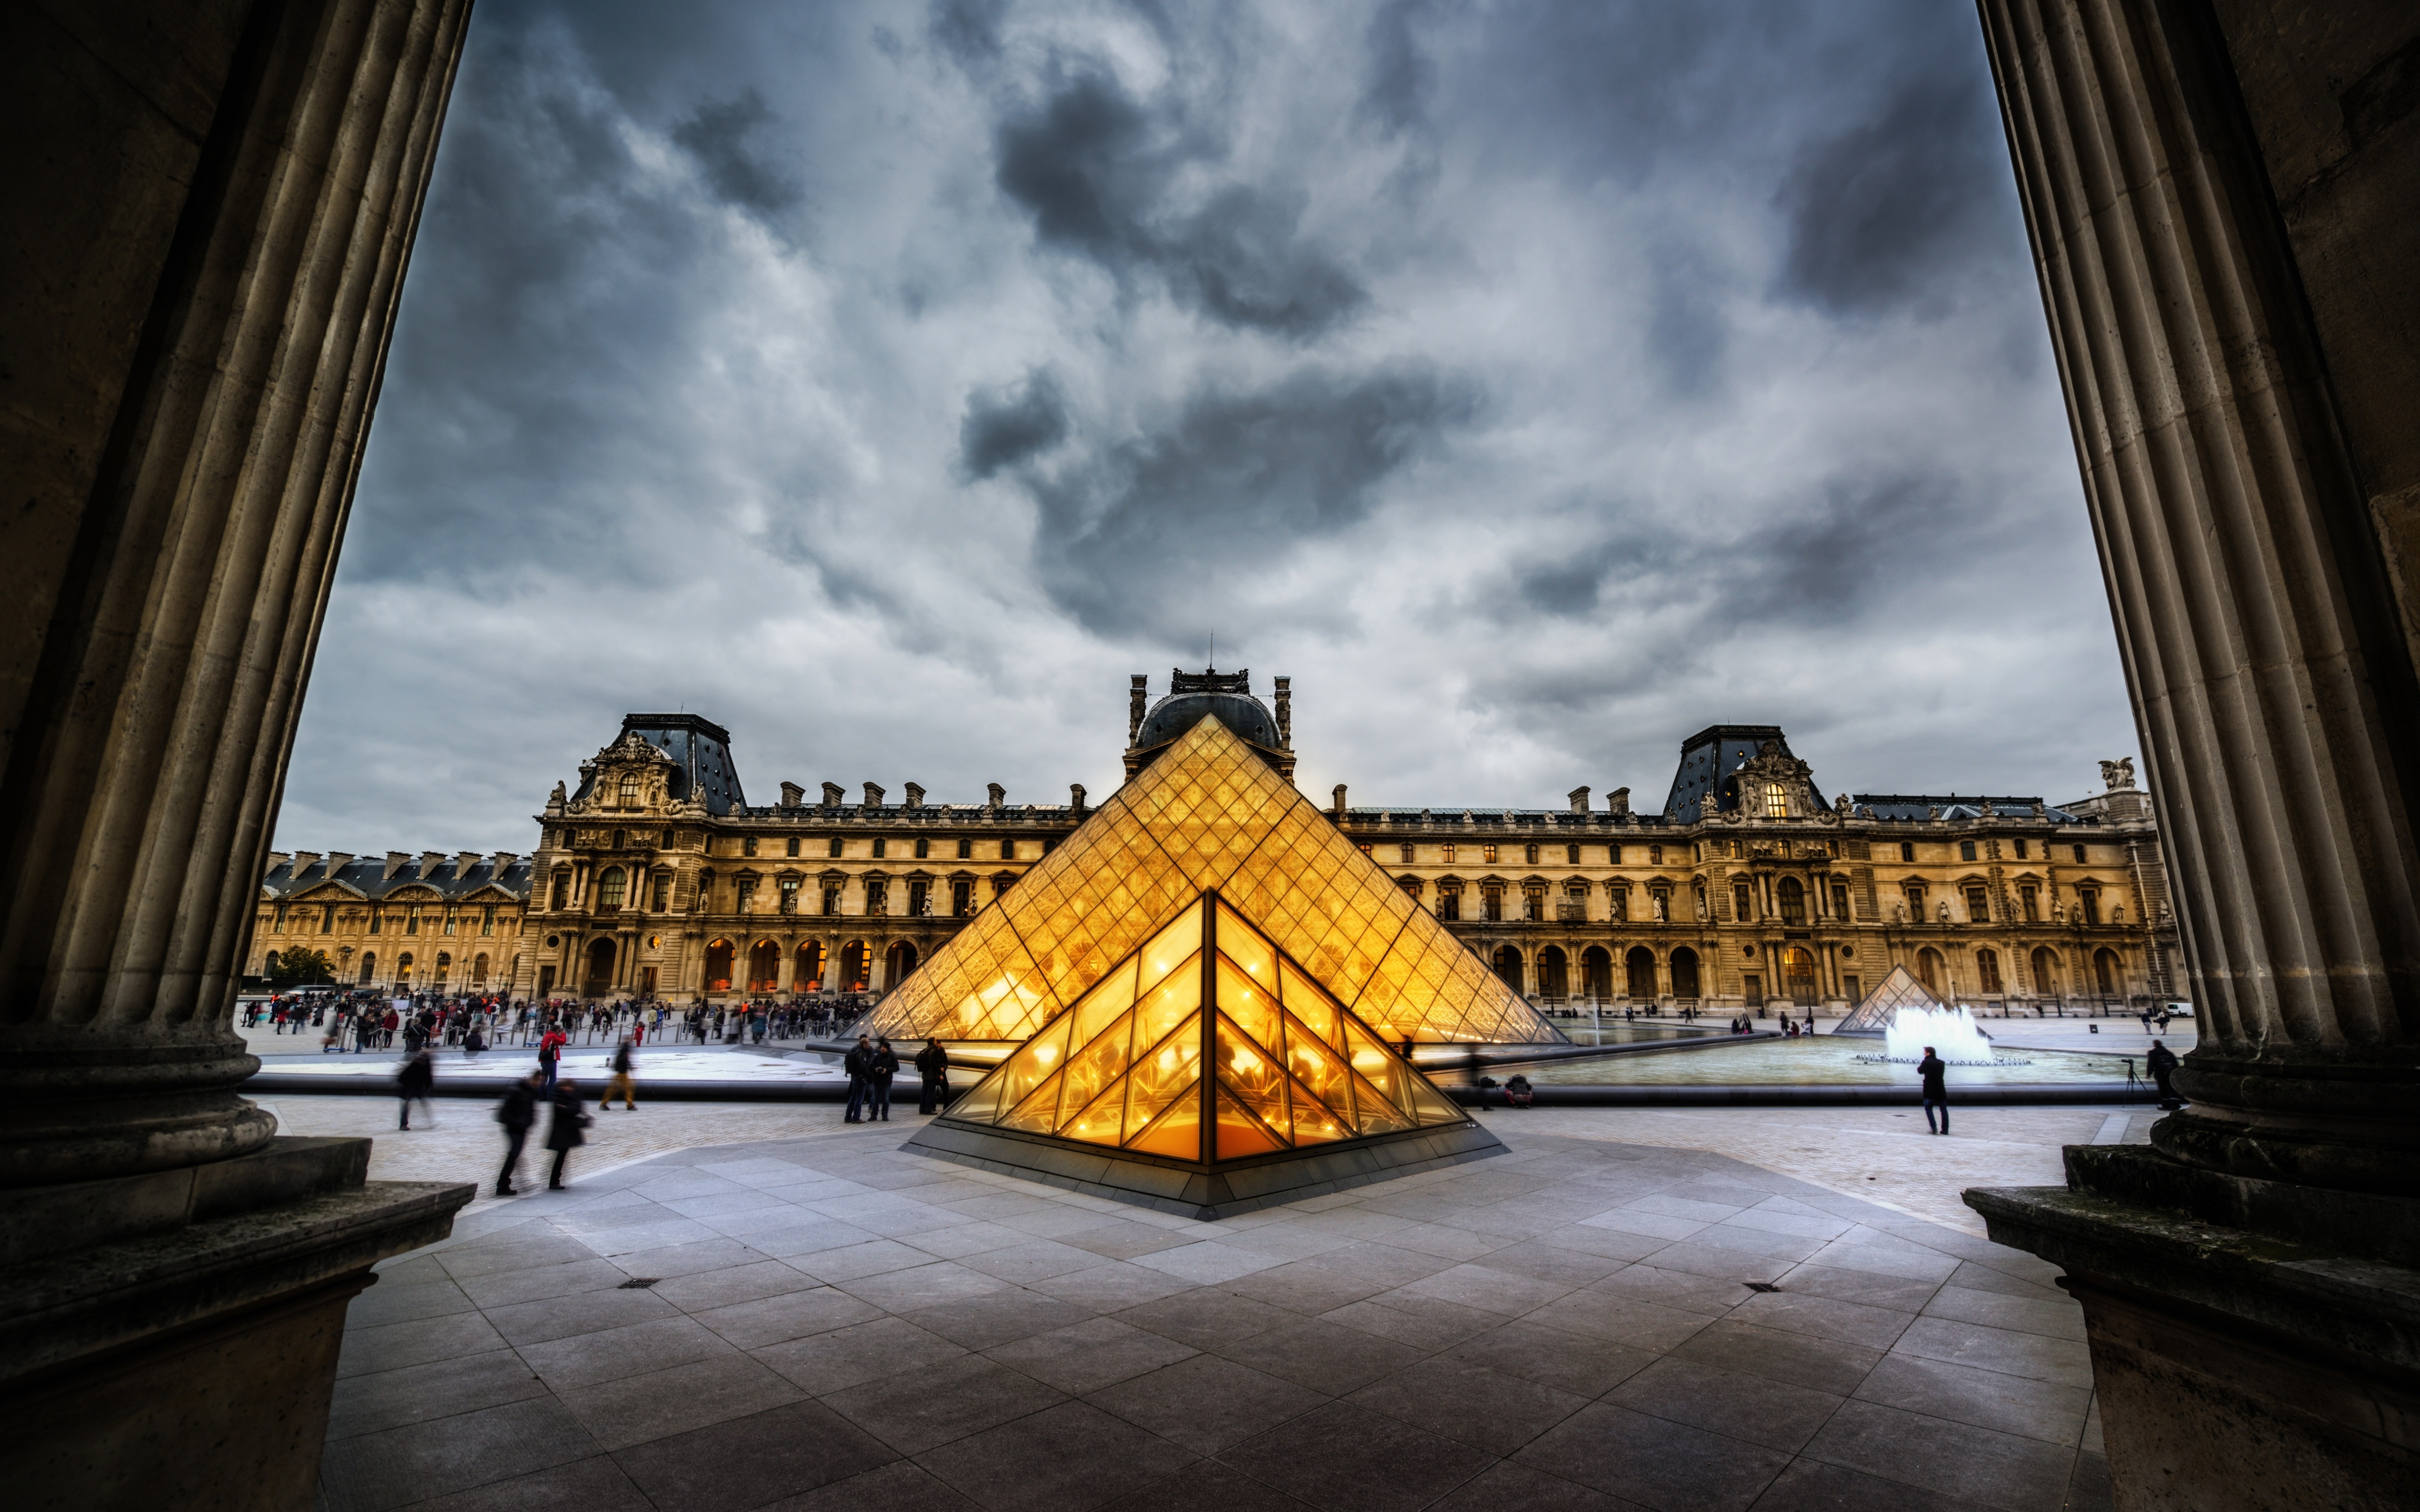 Man Made The Louvre HD Wallpaper | Background Image